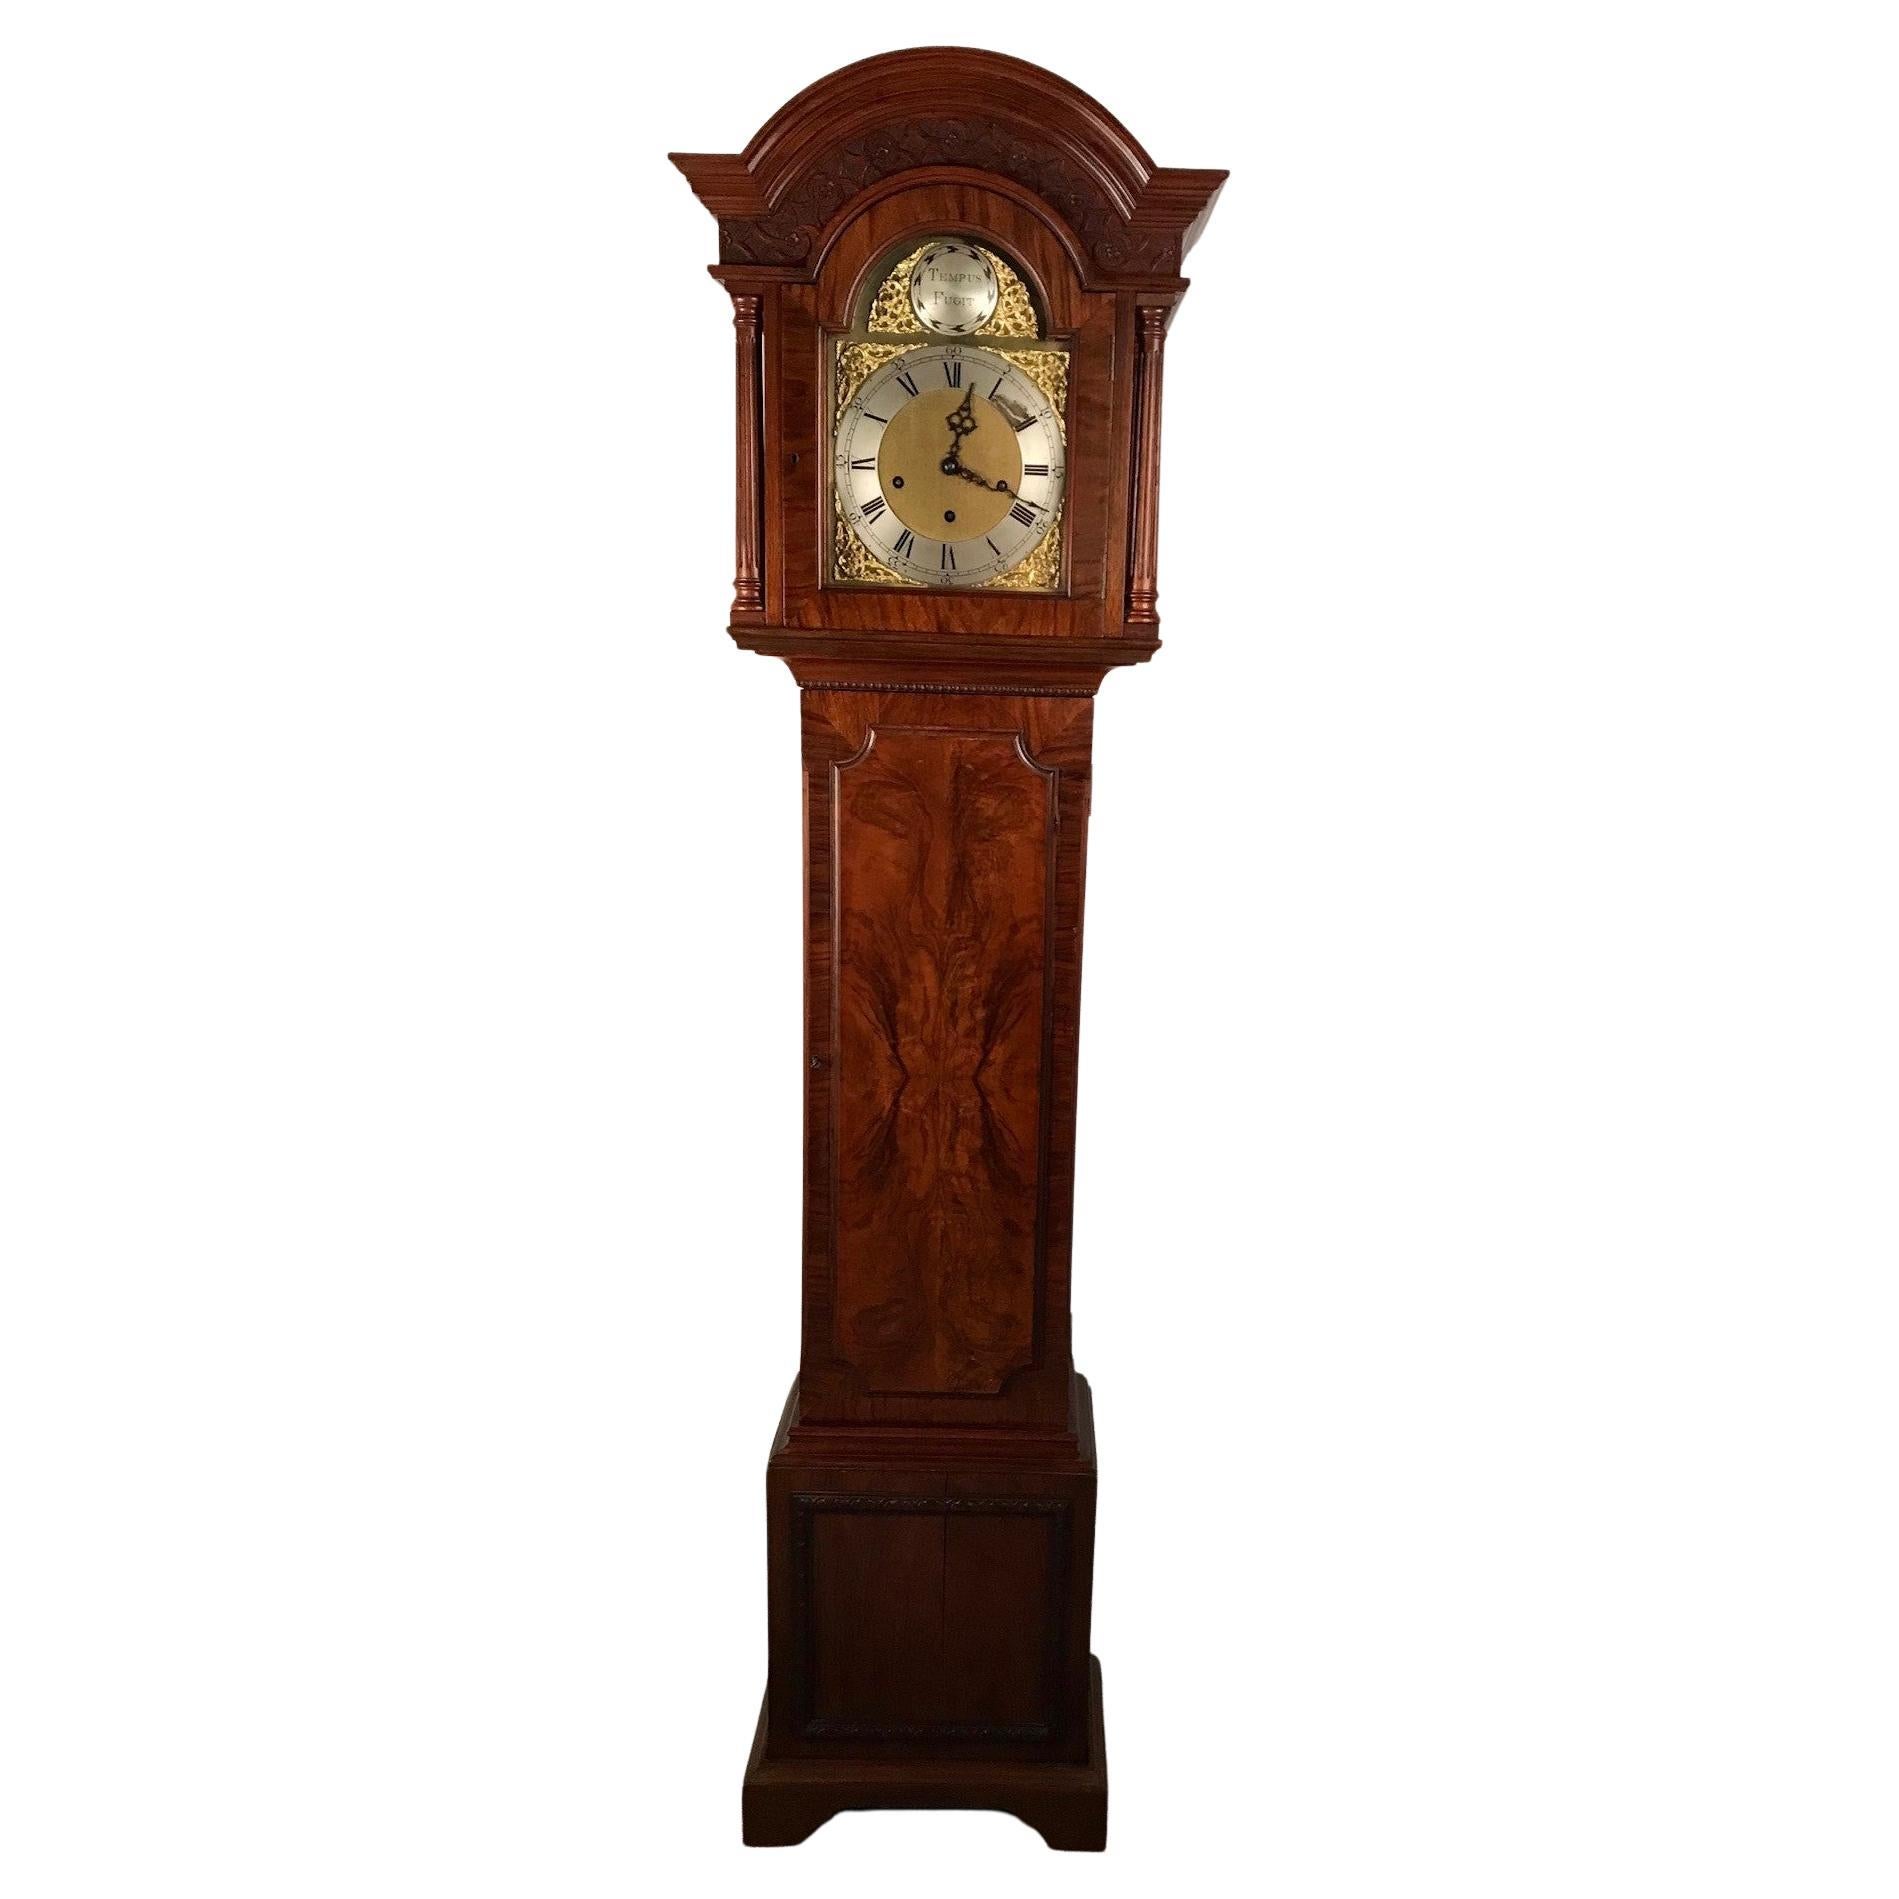 What is a hanging grandfather clock called?